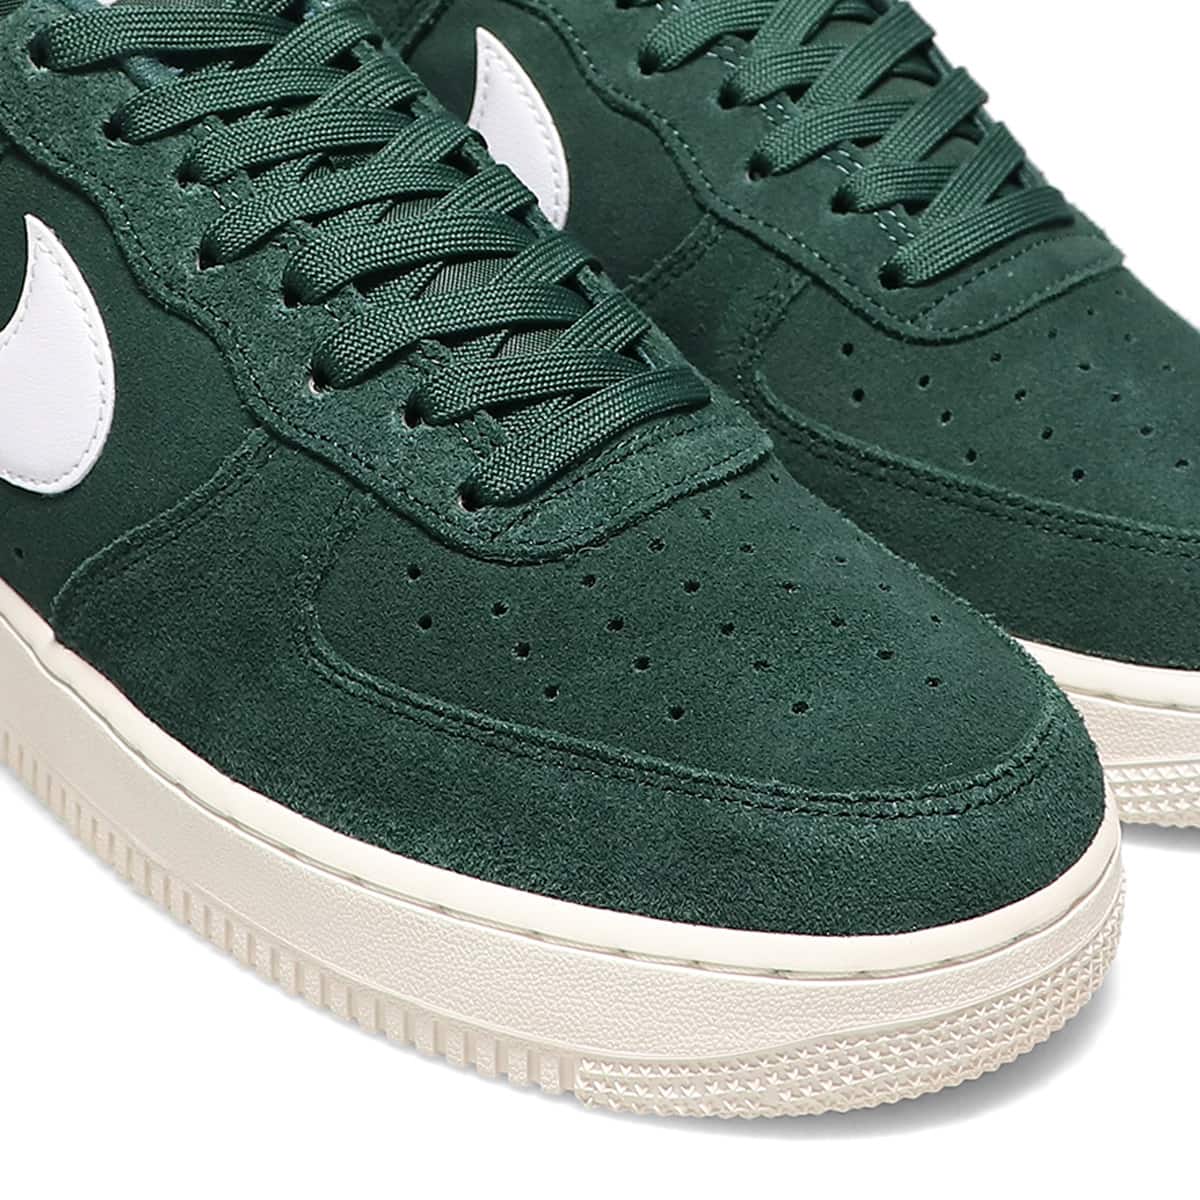 NIKE AIR FORCE 1 '07 LX PRO GREEN/WHITE-SAIL-GYM RED 22SP-I